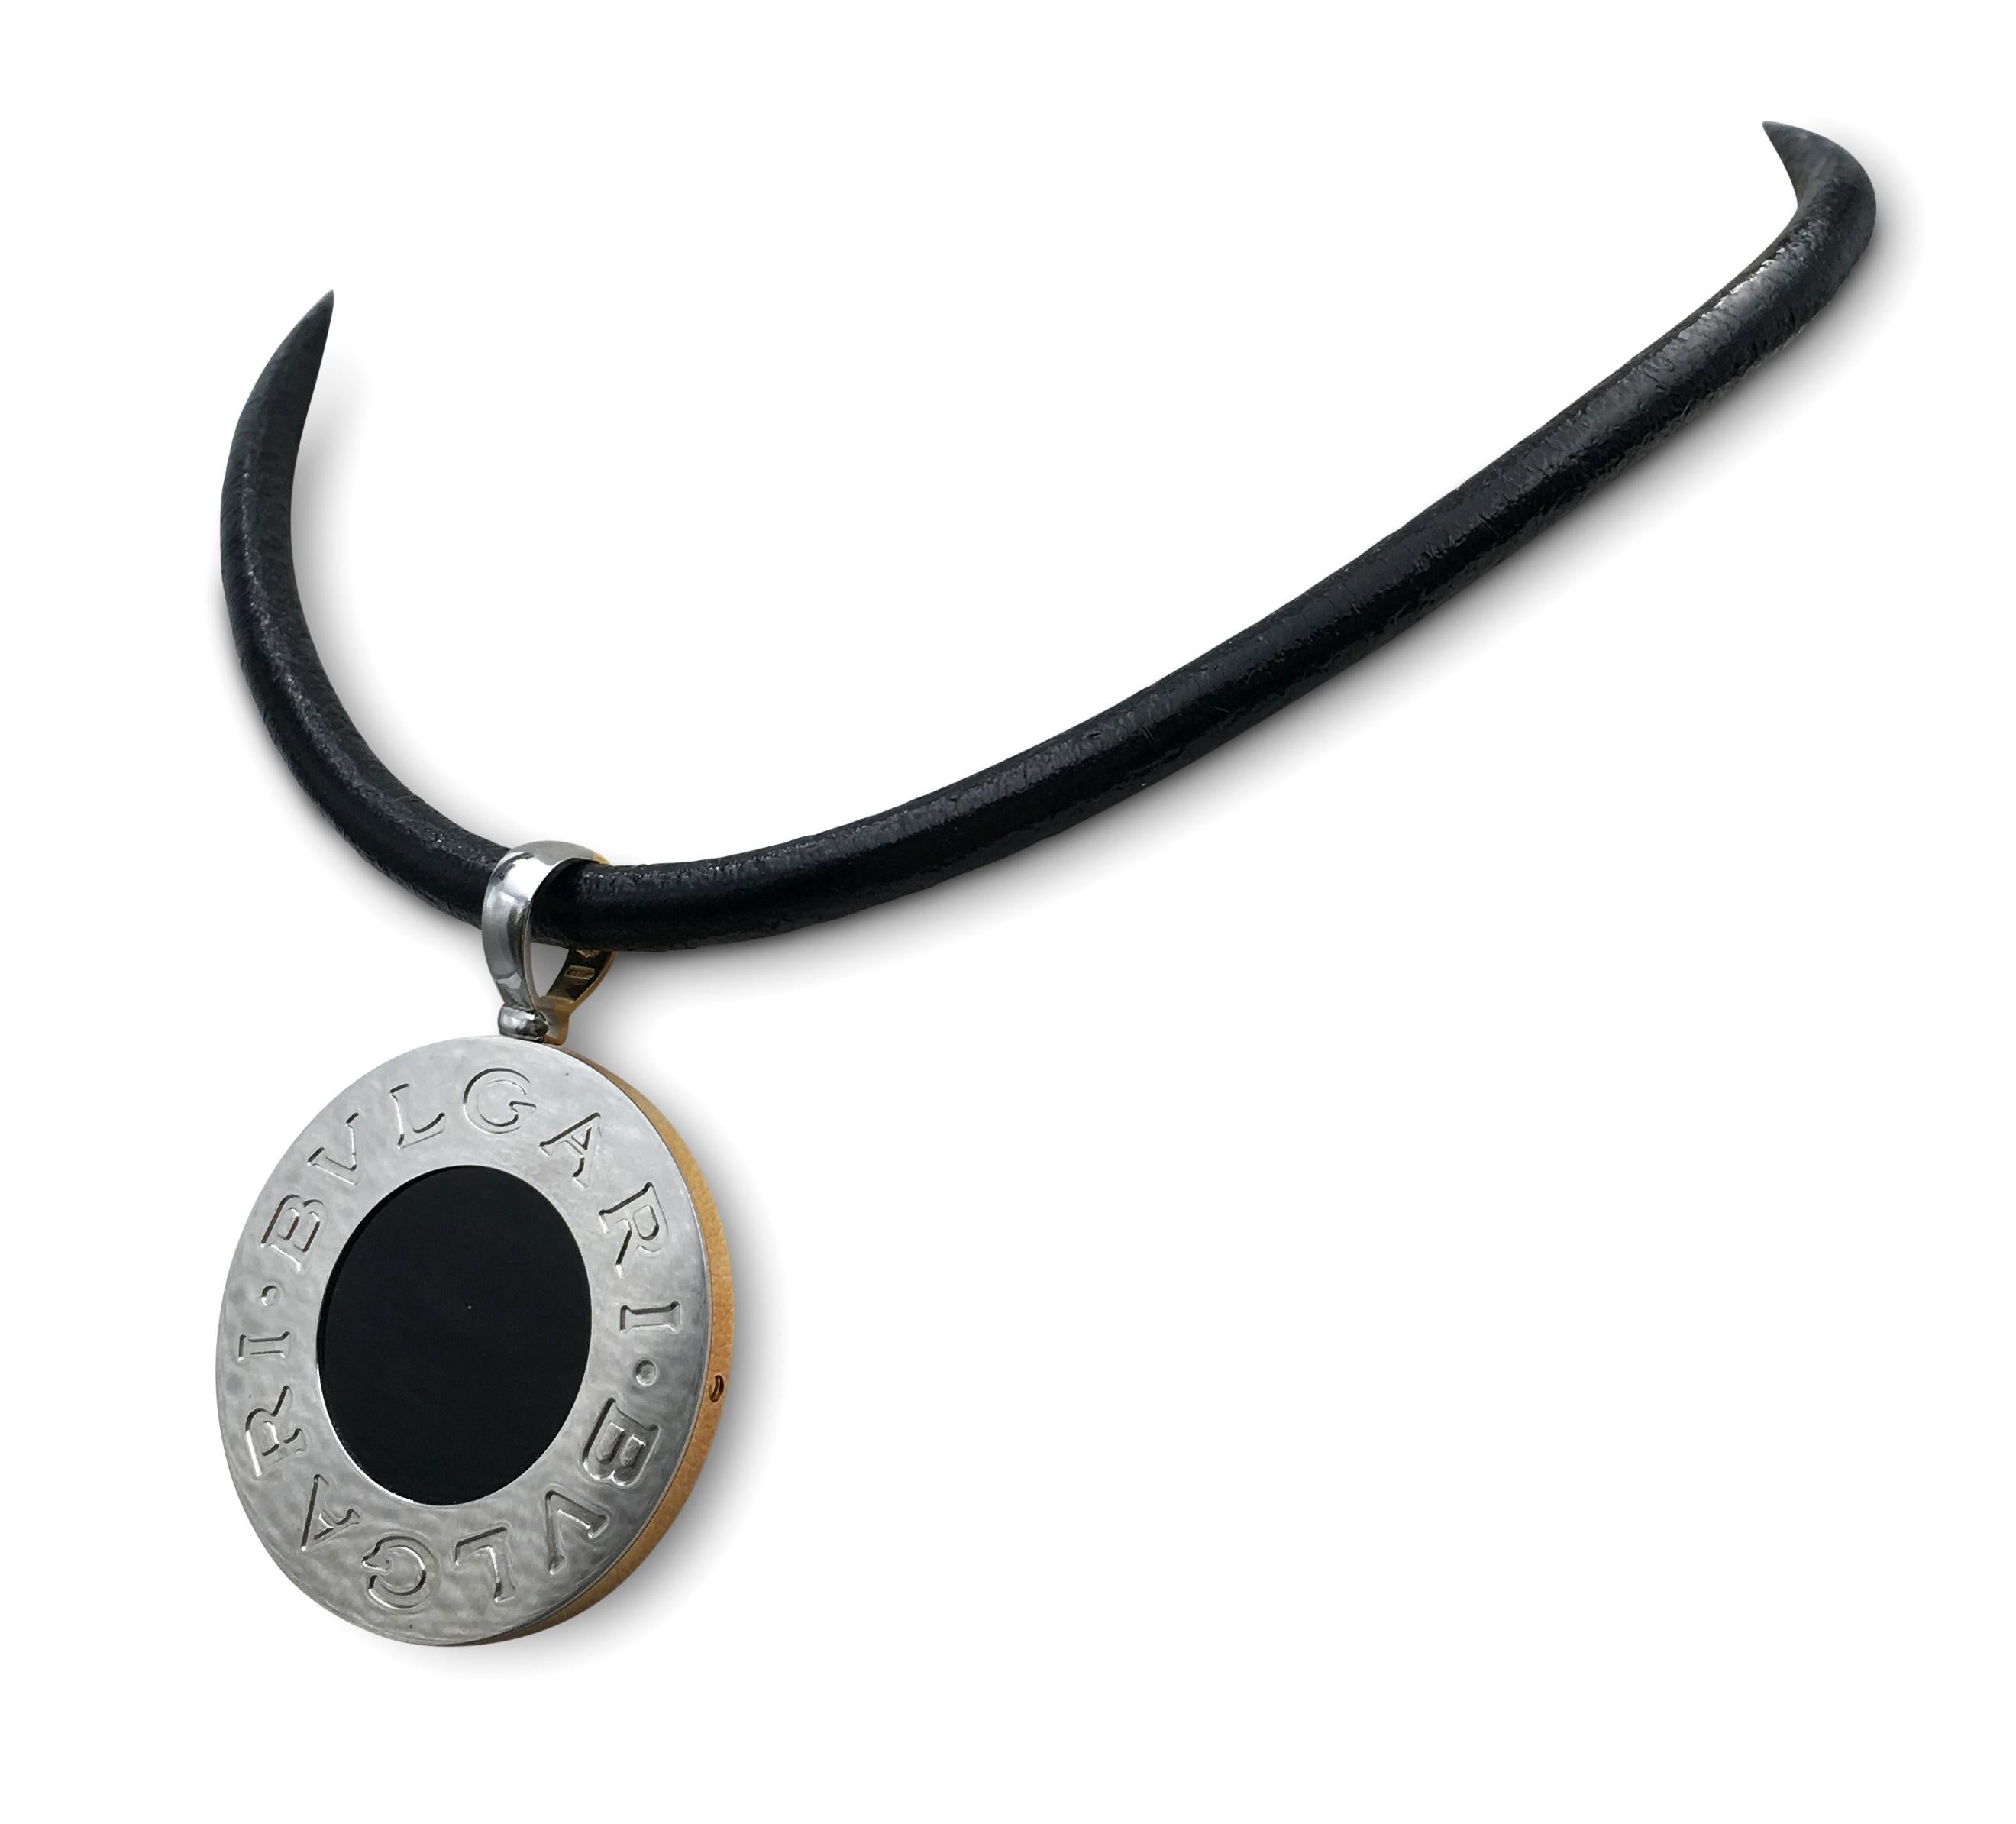 Authentic Bvlgari necklace features an iconic Bvlgari reversible coin pendant. One side of the coin is crafted in 18 karat yellow gold and set with a mother-of-pearl center while the reverse has a steel coin with an onyx center. The coin is strung